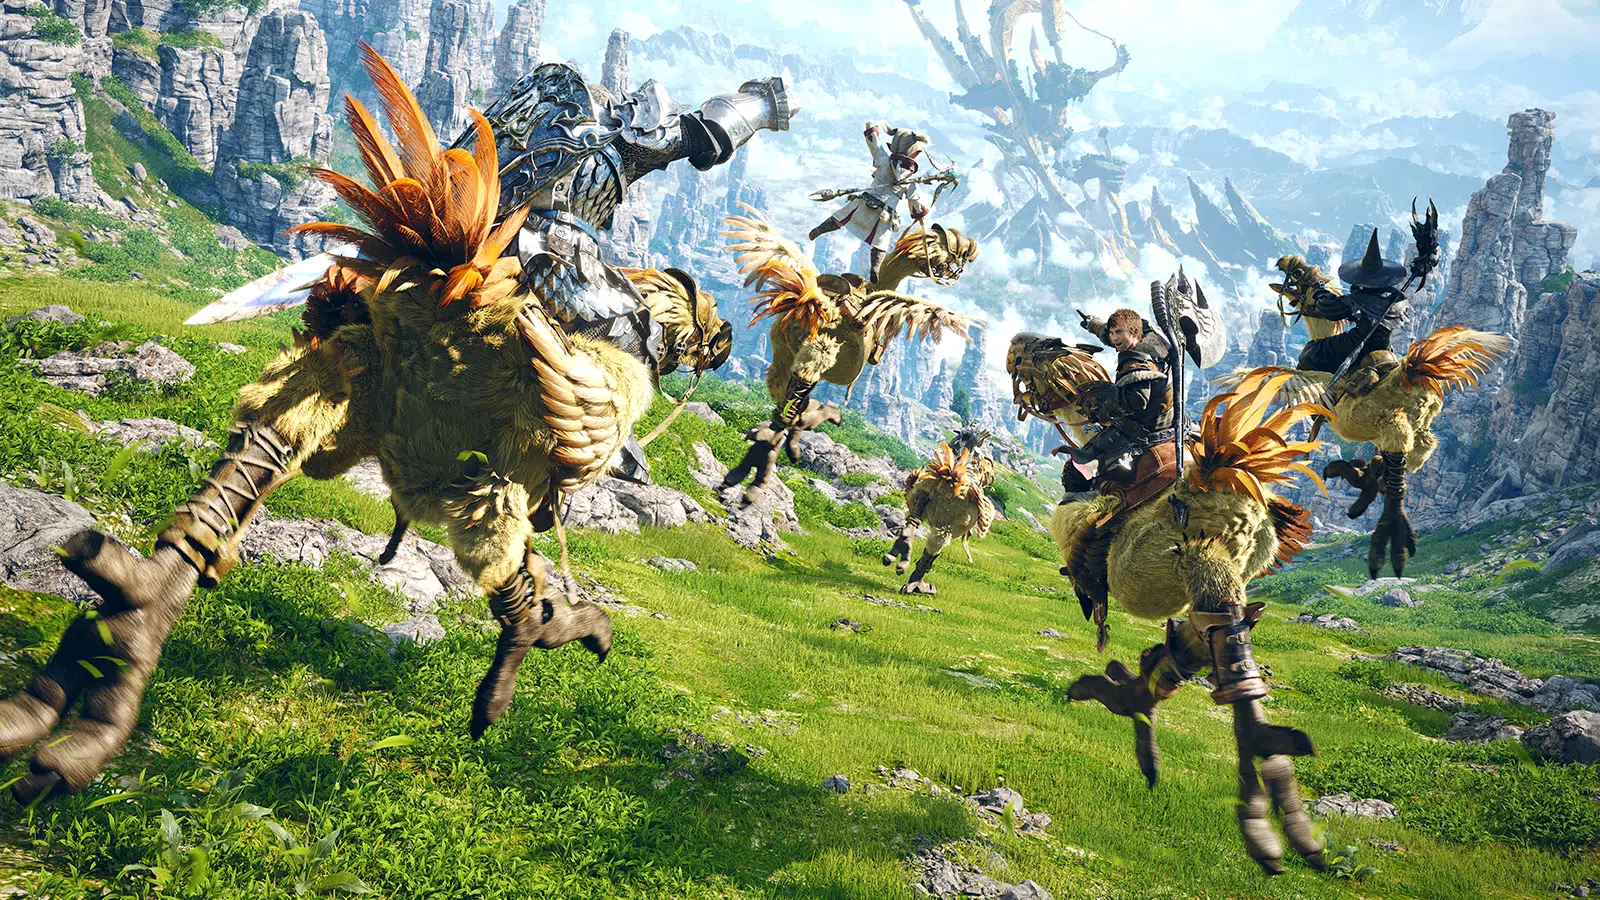 North American Server Expansion FFXIV Coming in November, More Housing on the Way